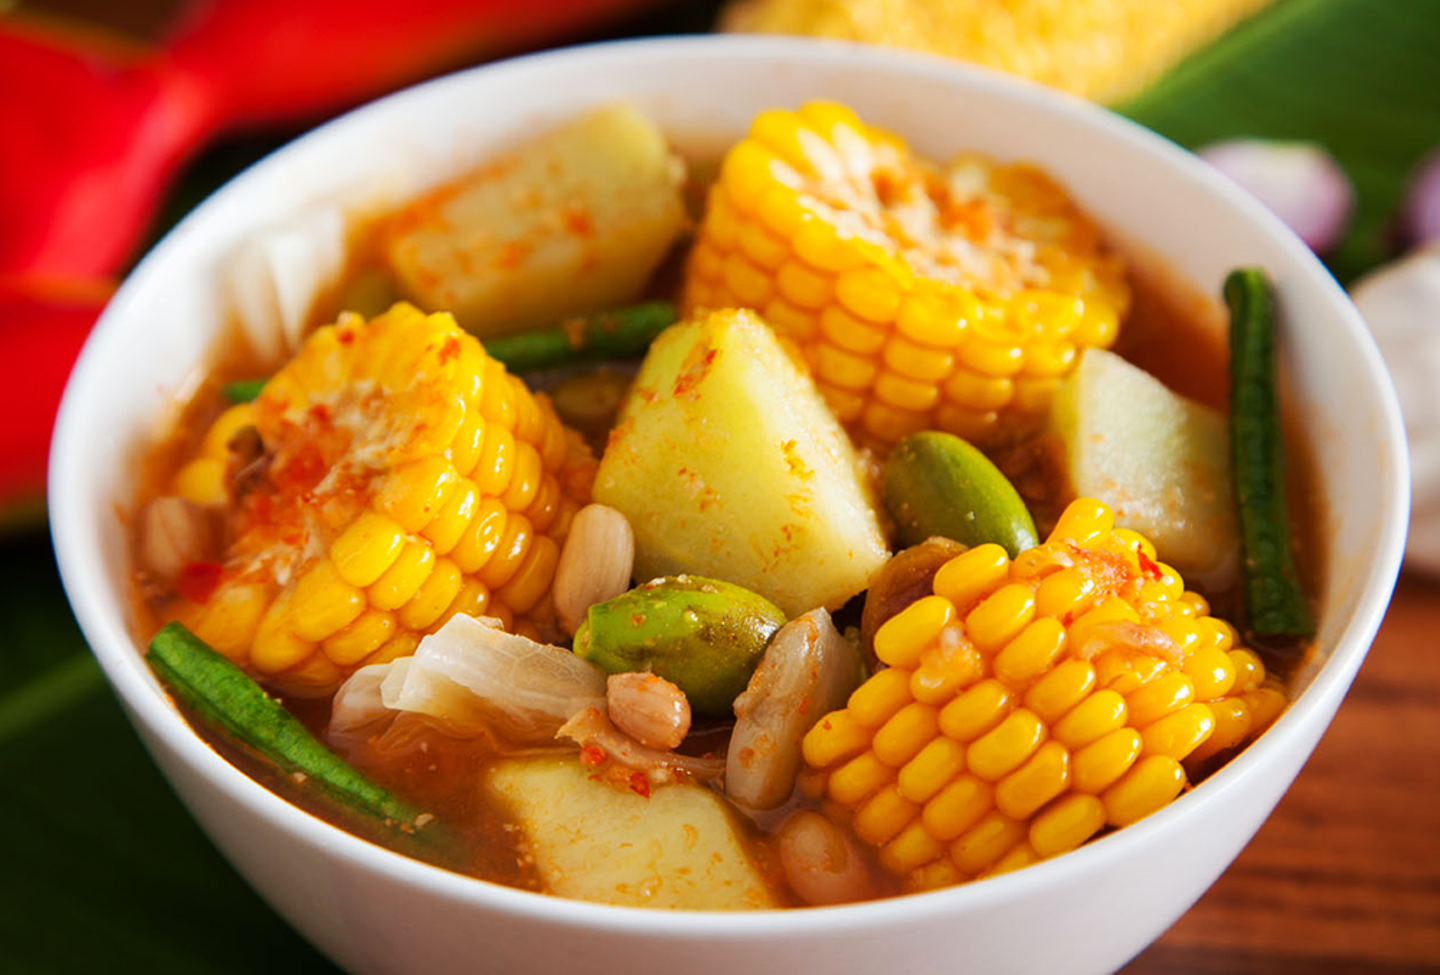 Photo Sayur Asem - Vegetables in Tamarind Soup from Palopo City